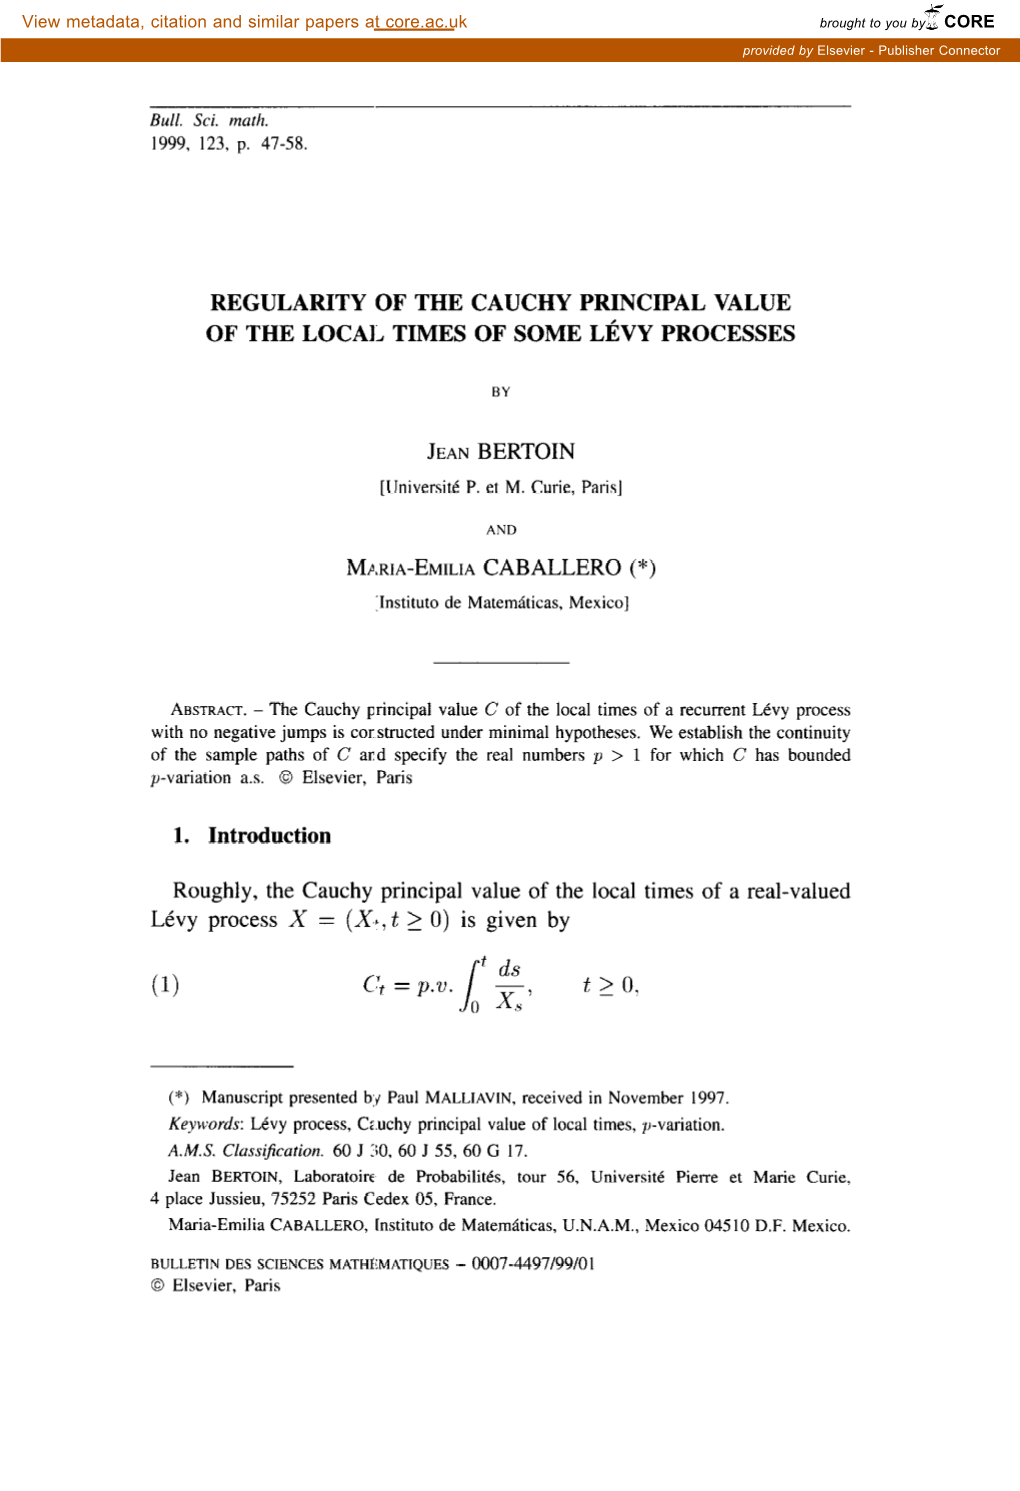 REGULARITY of the CAUCHY PRINCIPAL VALUE of the LOCAL TIMES of SOME Lihy PROCESSES